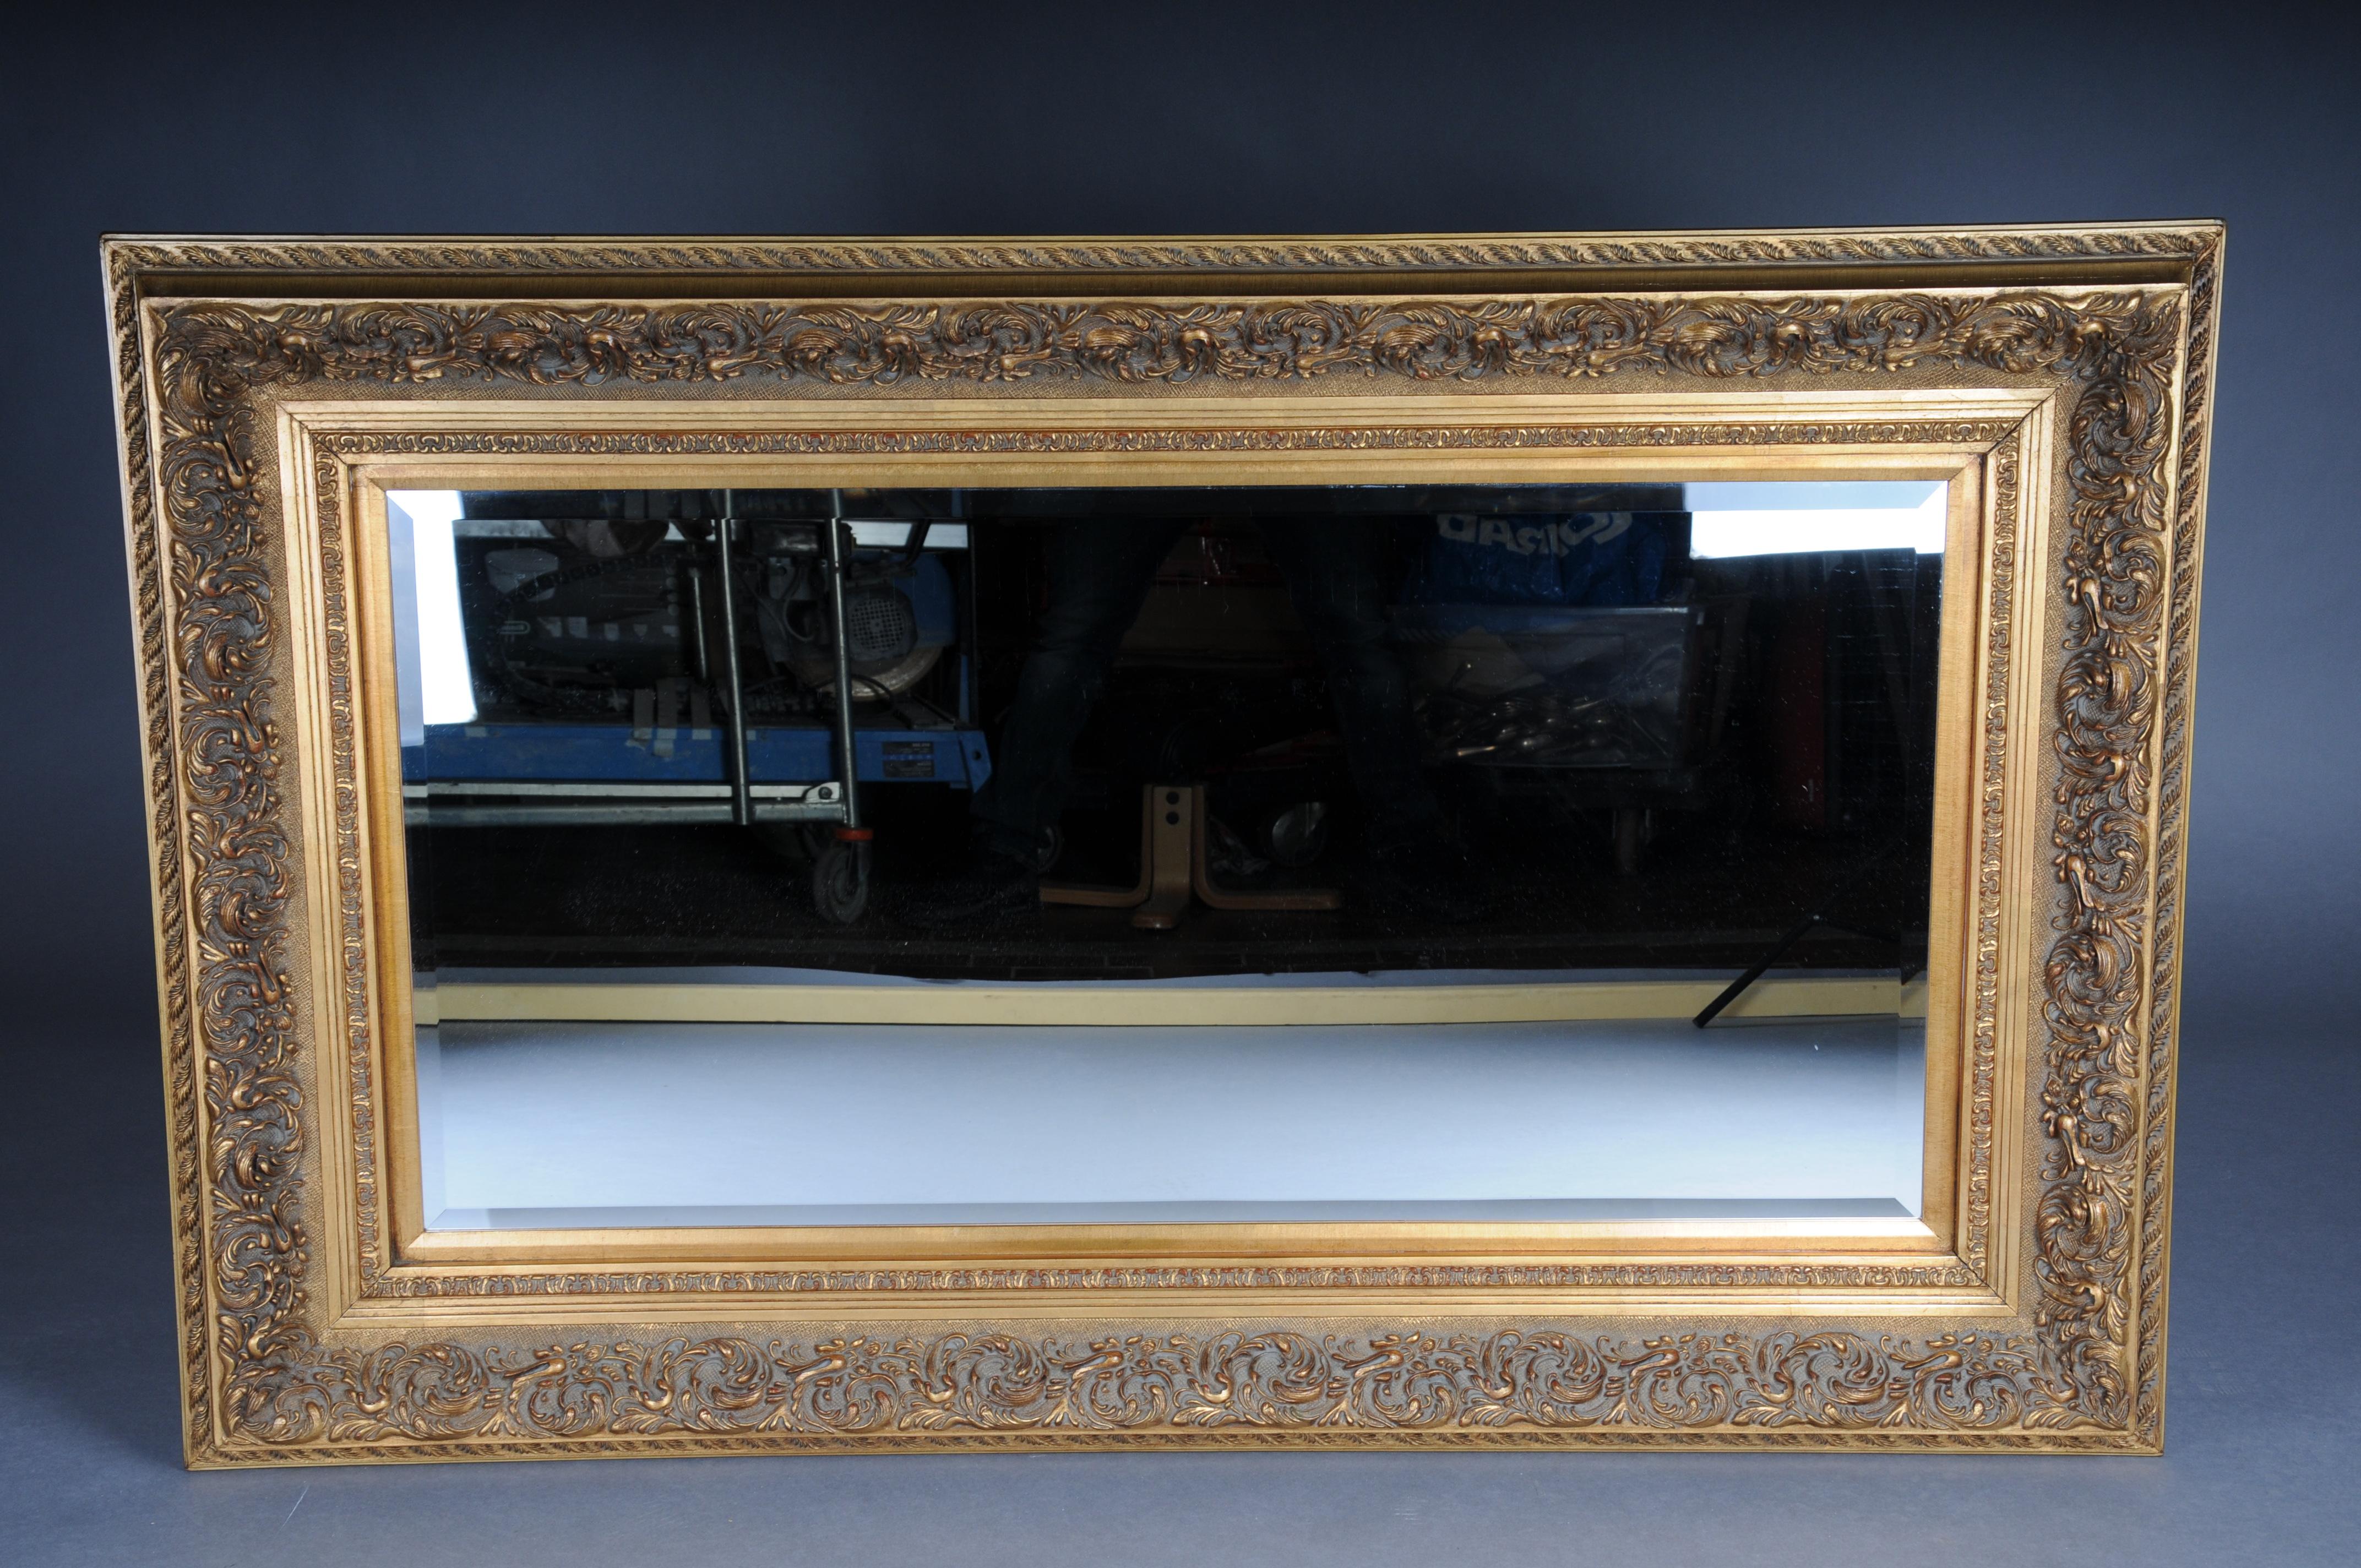 Monumental old wall mirror, gold


Wide ornate frame with fine carvings. Facet cut mirror. The wall mirror can be hung in portrait or landscape format. Very elegant and high-quality workmanship.